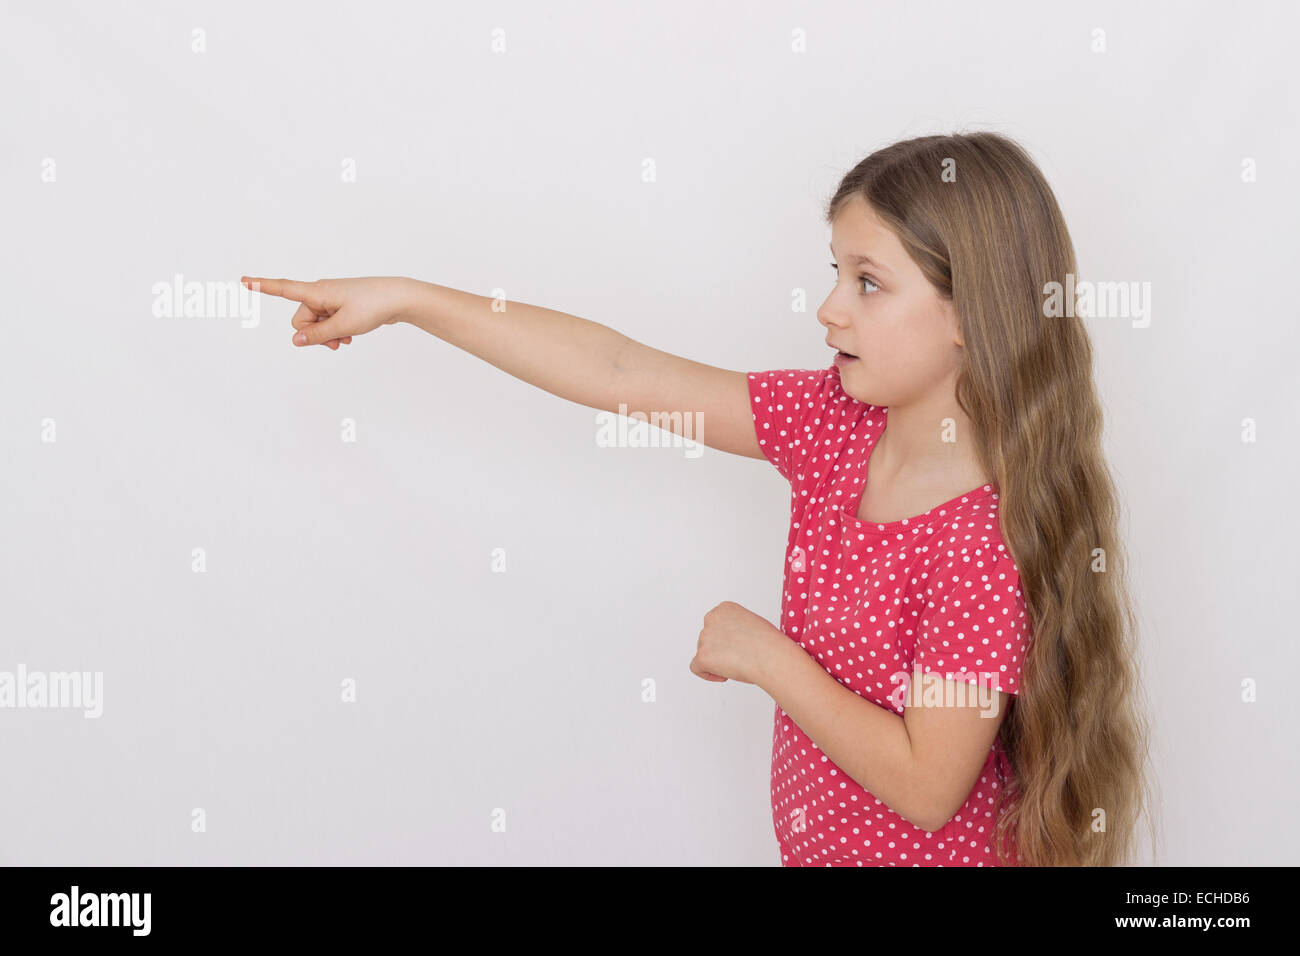 A girl shows the index finger forward Stock Photo